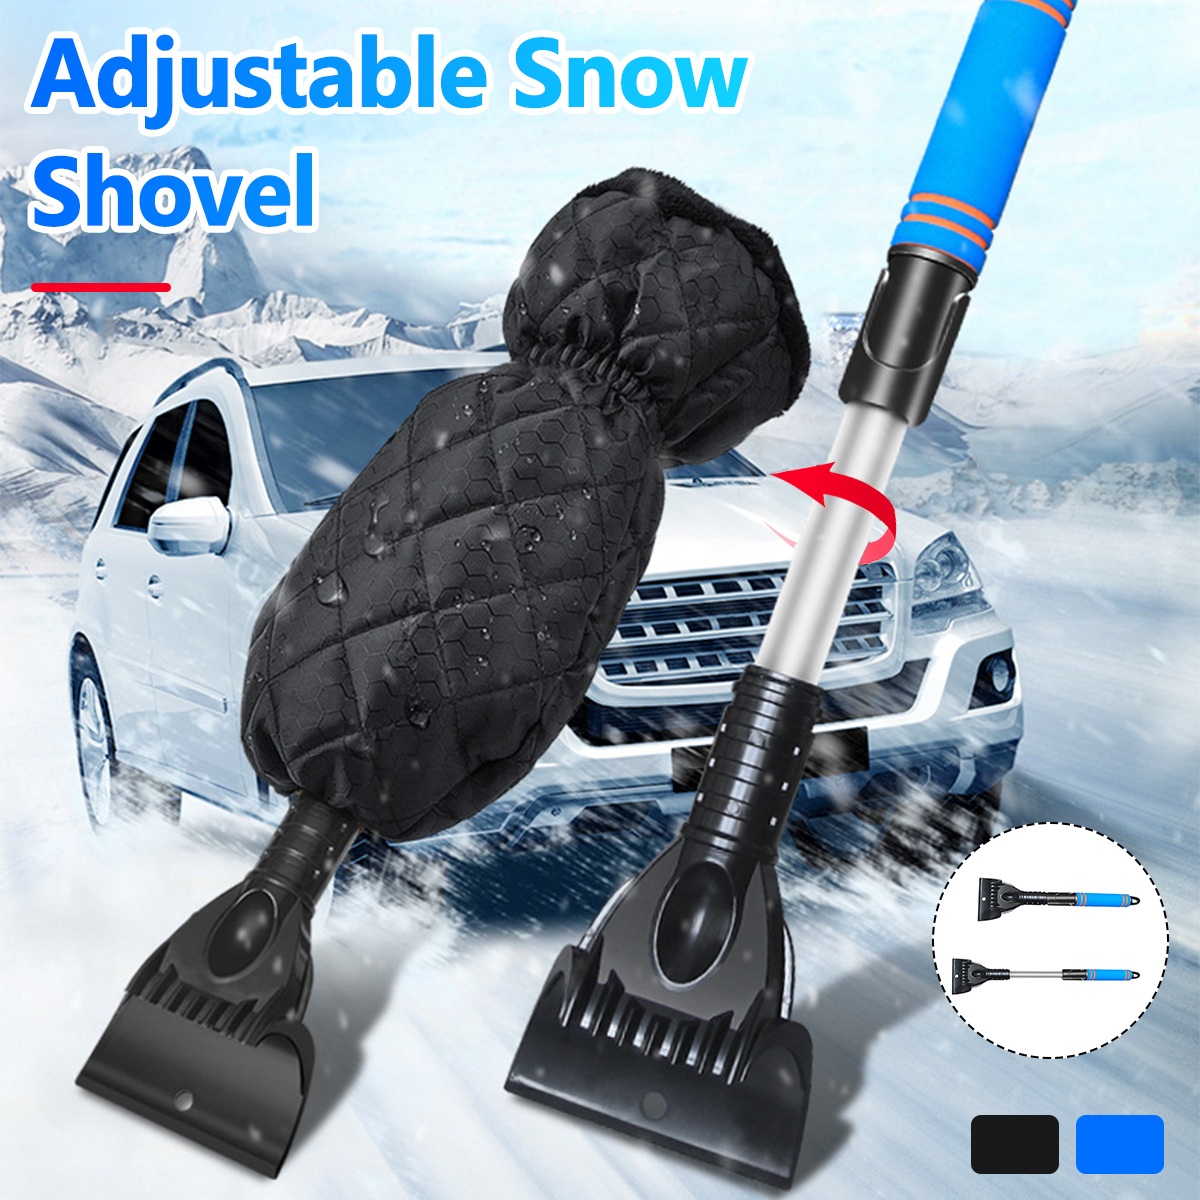 56CM-Telescopic-Rotating-Snow-Shovel-With-Gloves-Vehicle-Winter-Shoveling-Snow-Tools-1786471-1